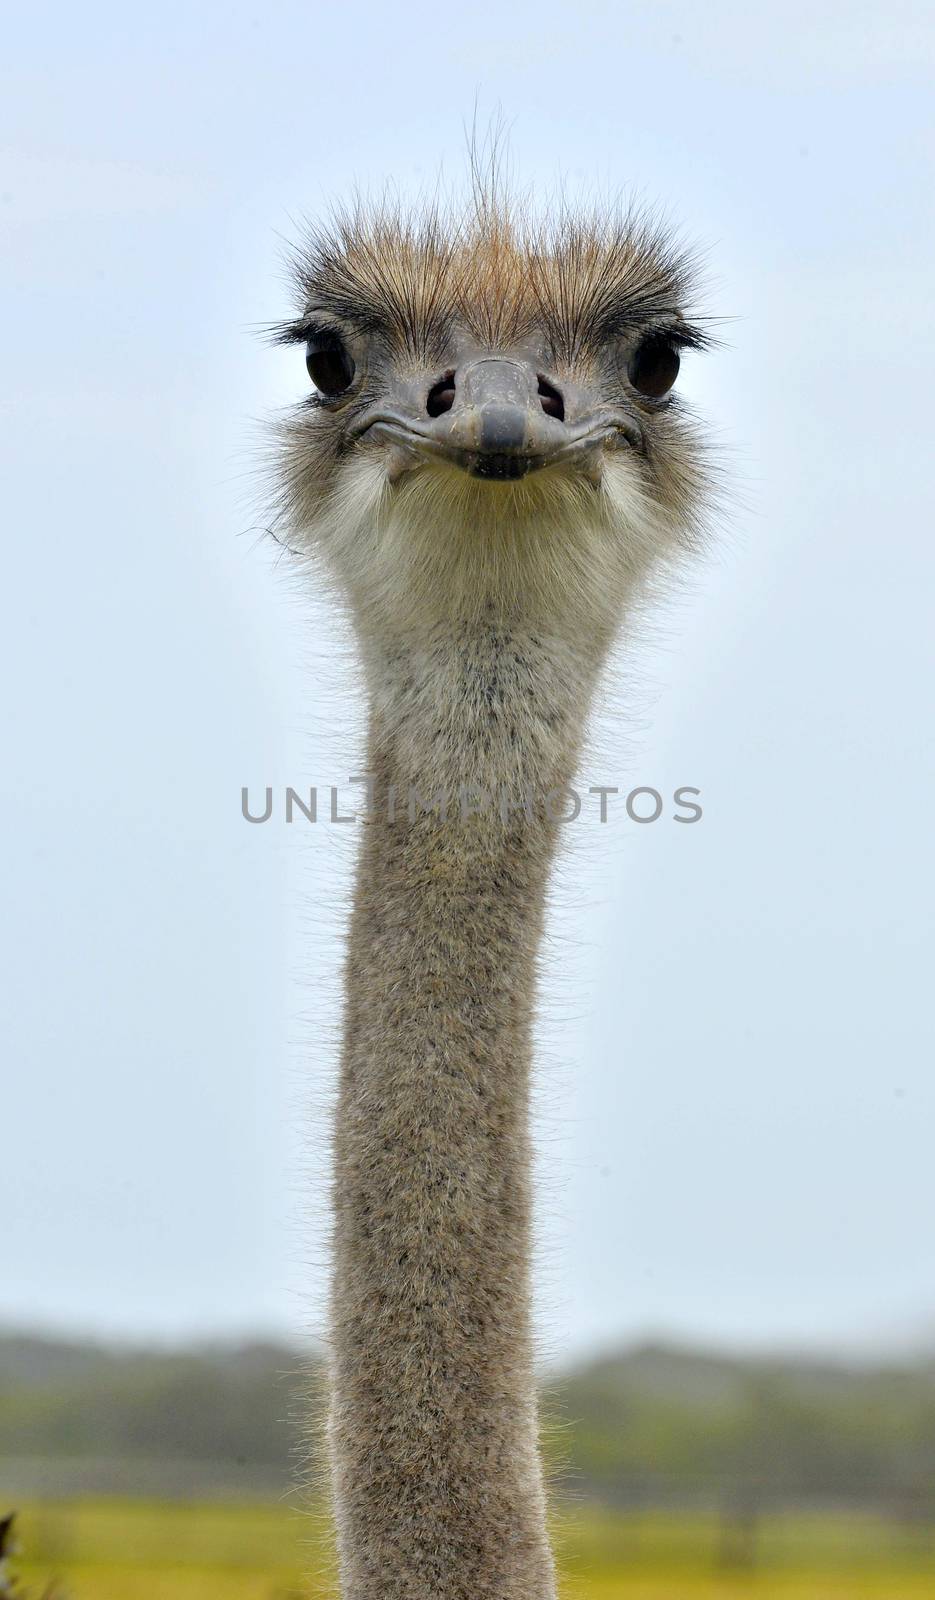 head of the ostrich close-up by SURZ